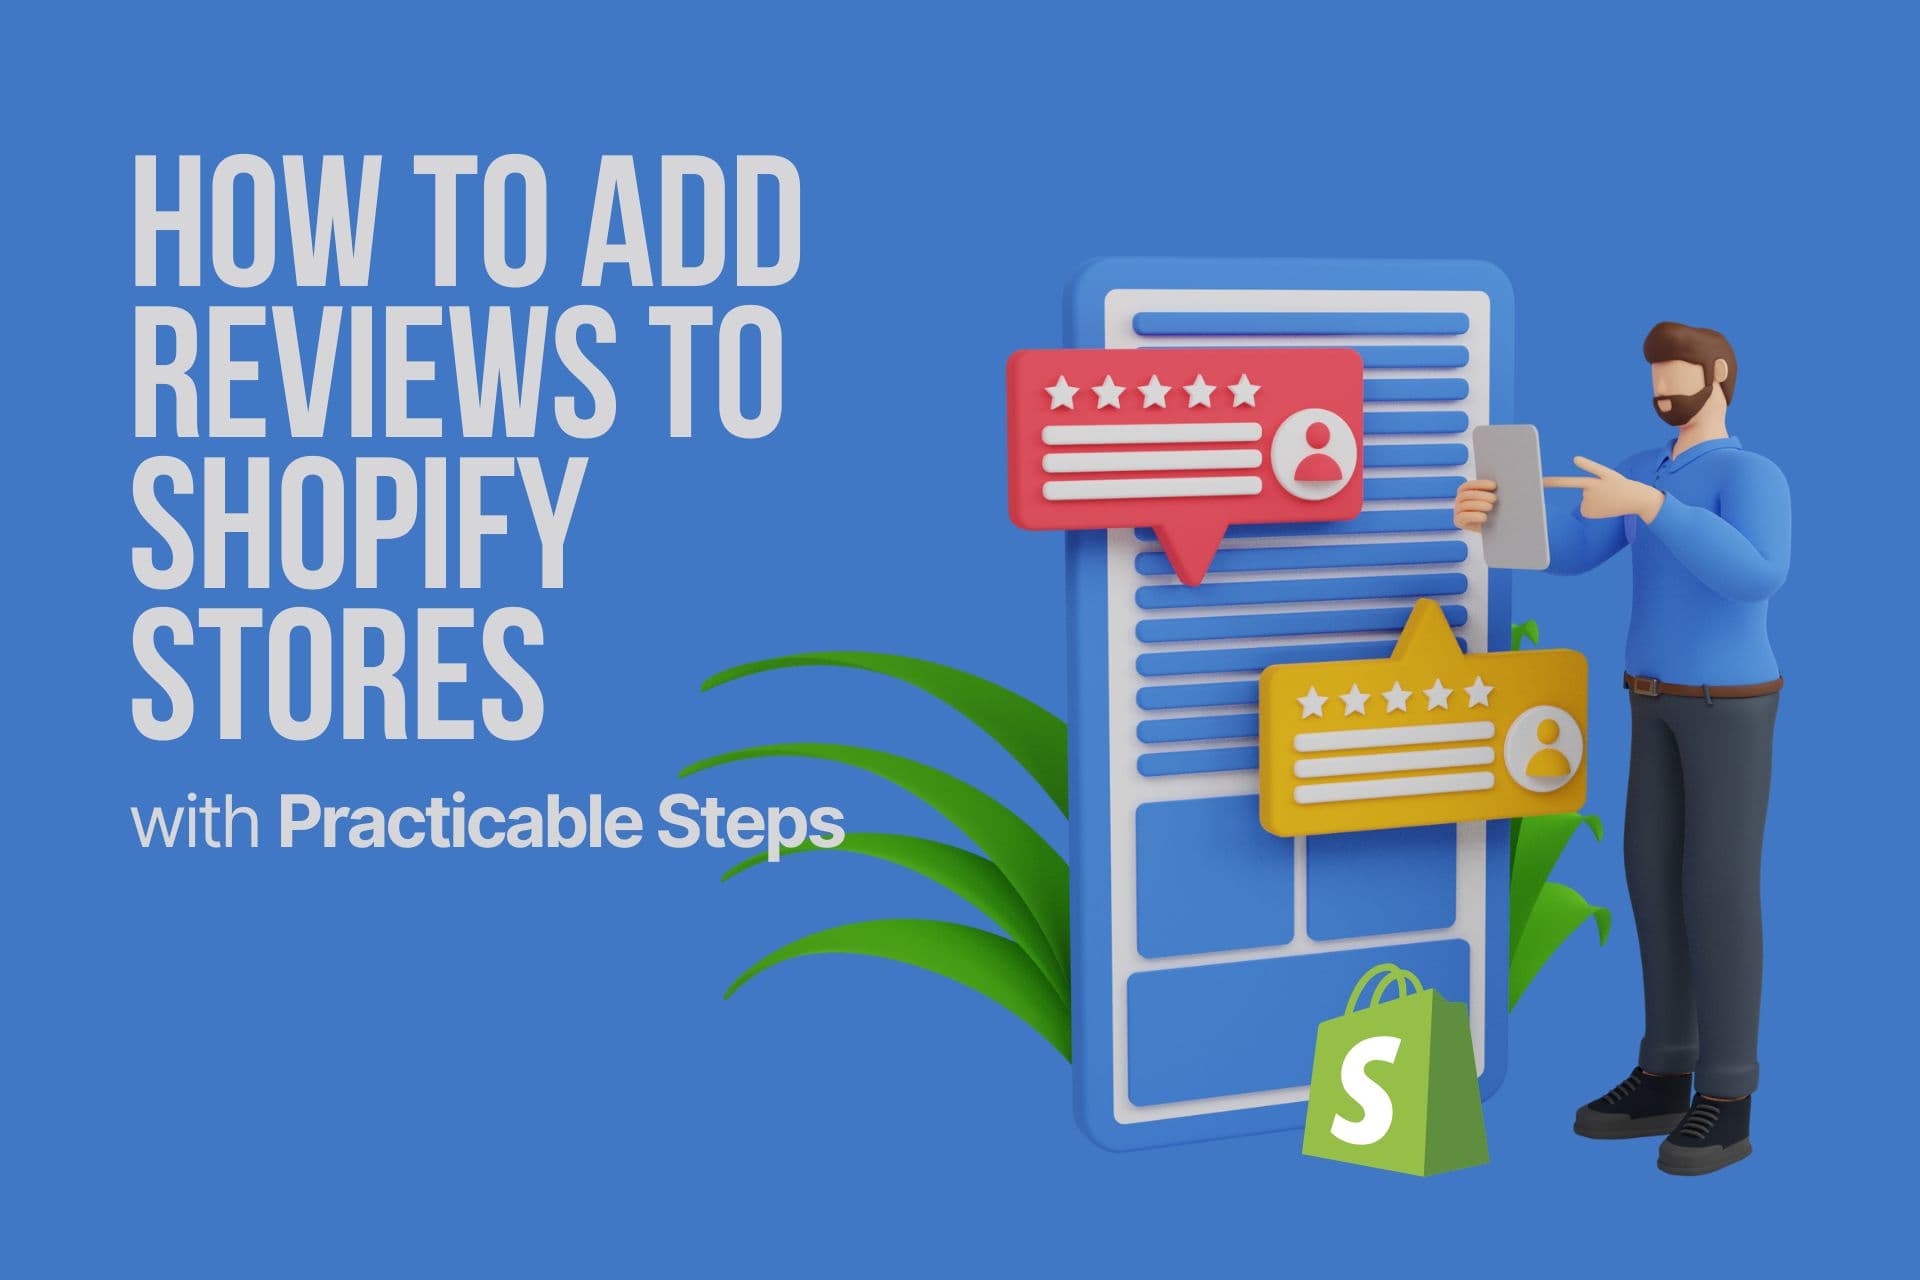 How to Add Reviews to Shopify Stores (with Practicable Steps)